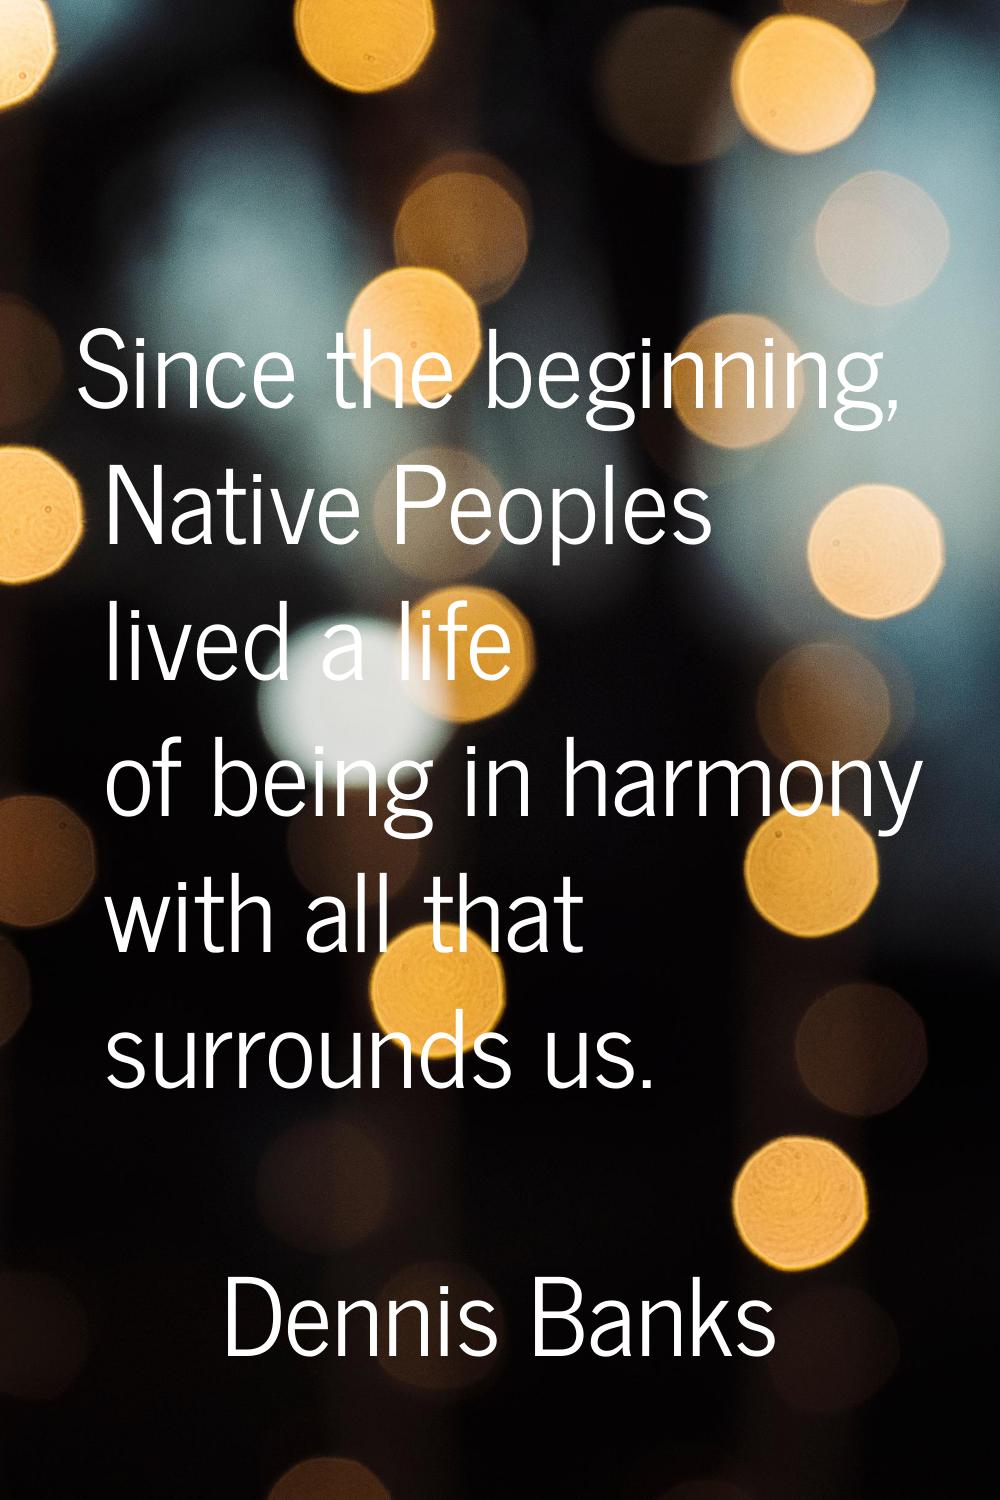 Since the beginning, Native Peoples lived a life of being in harmony with all that surrounds us.